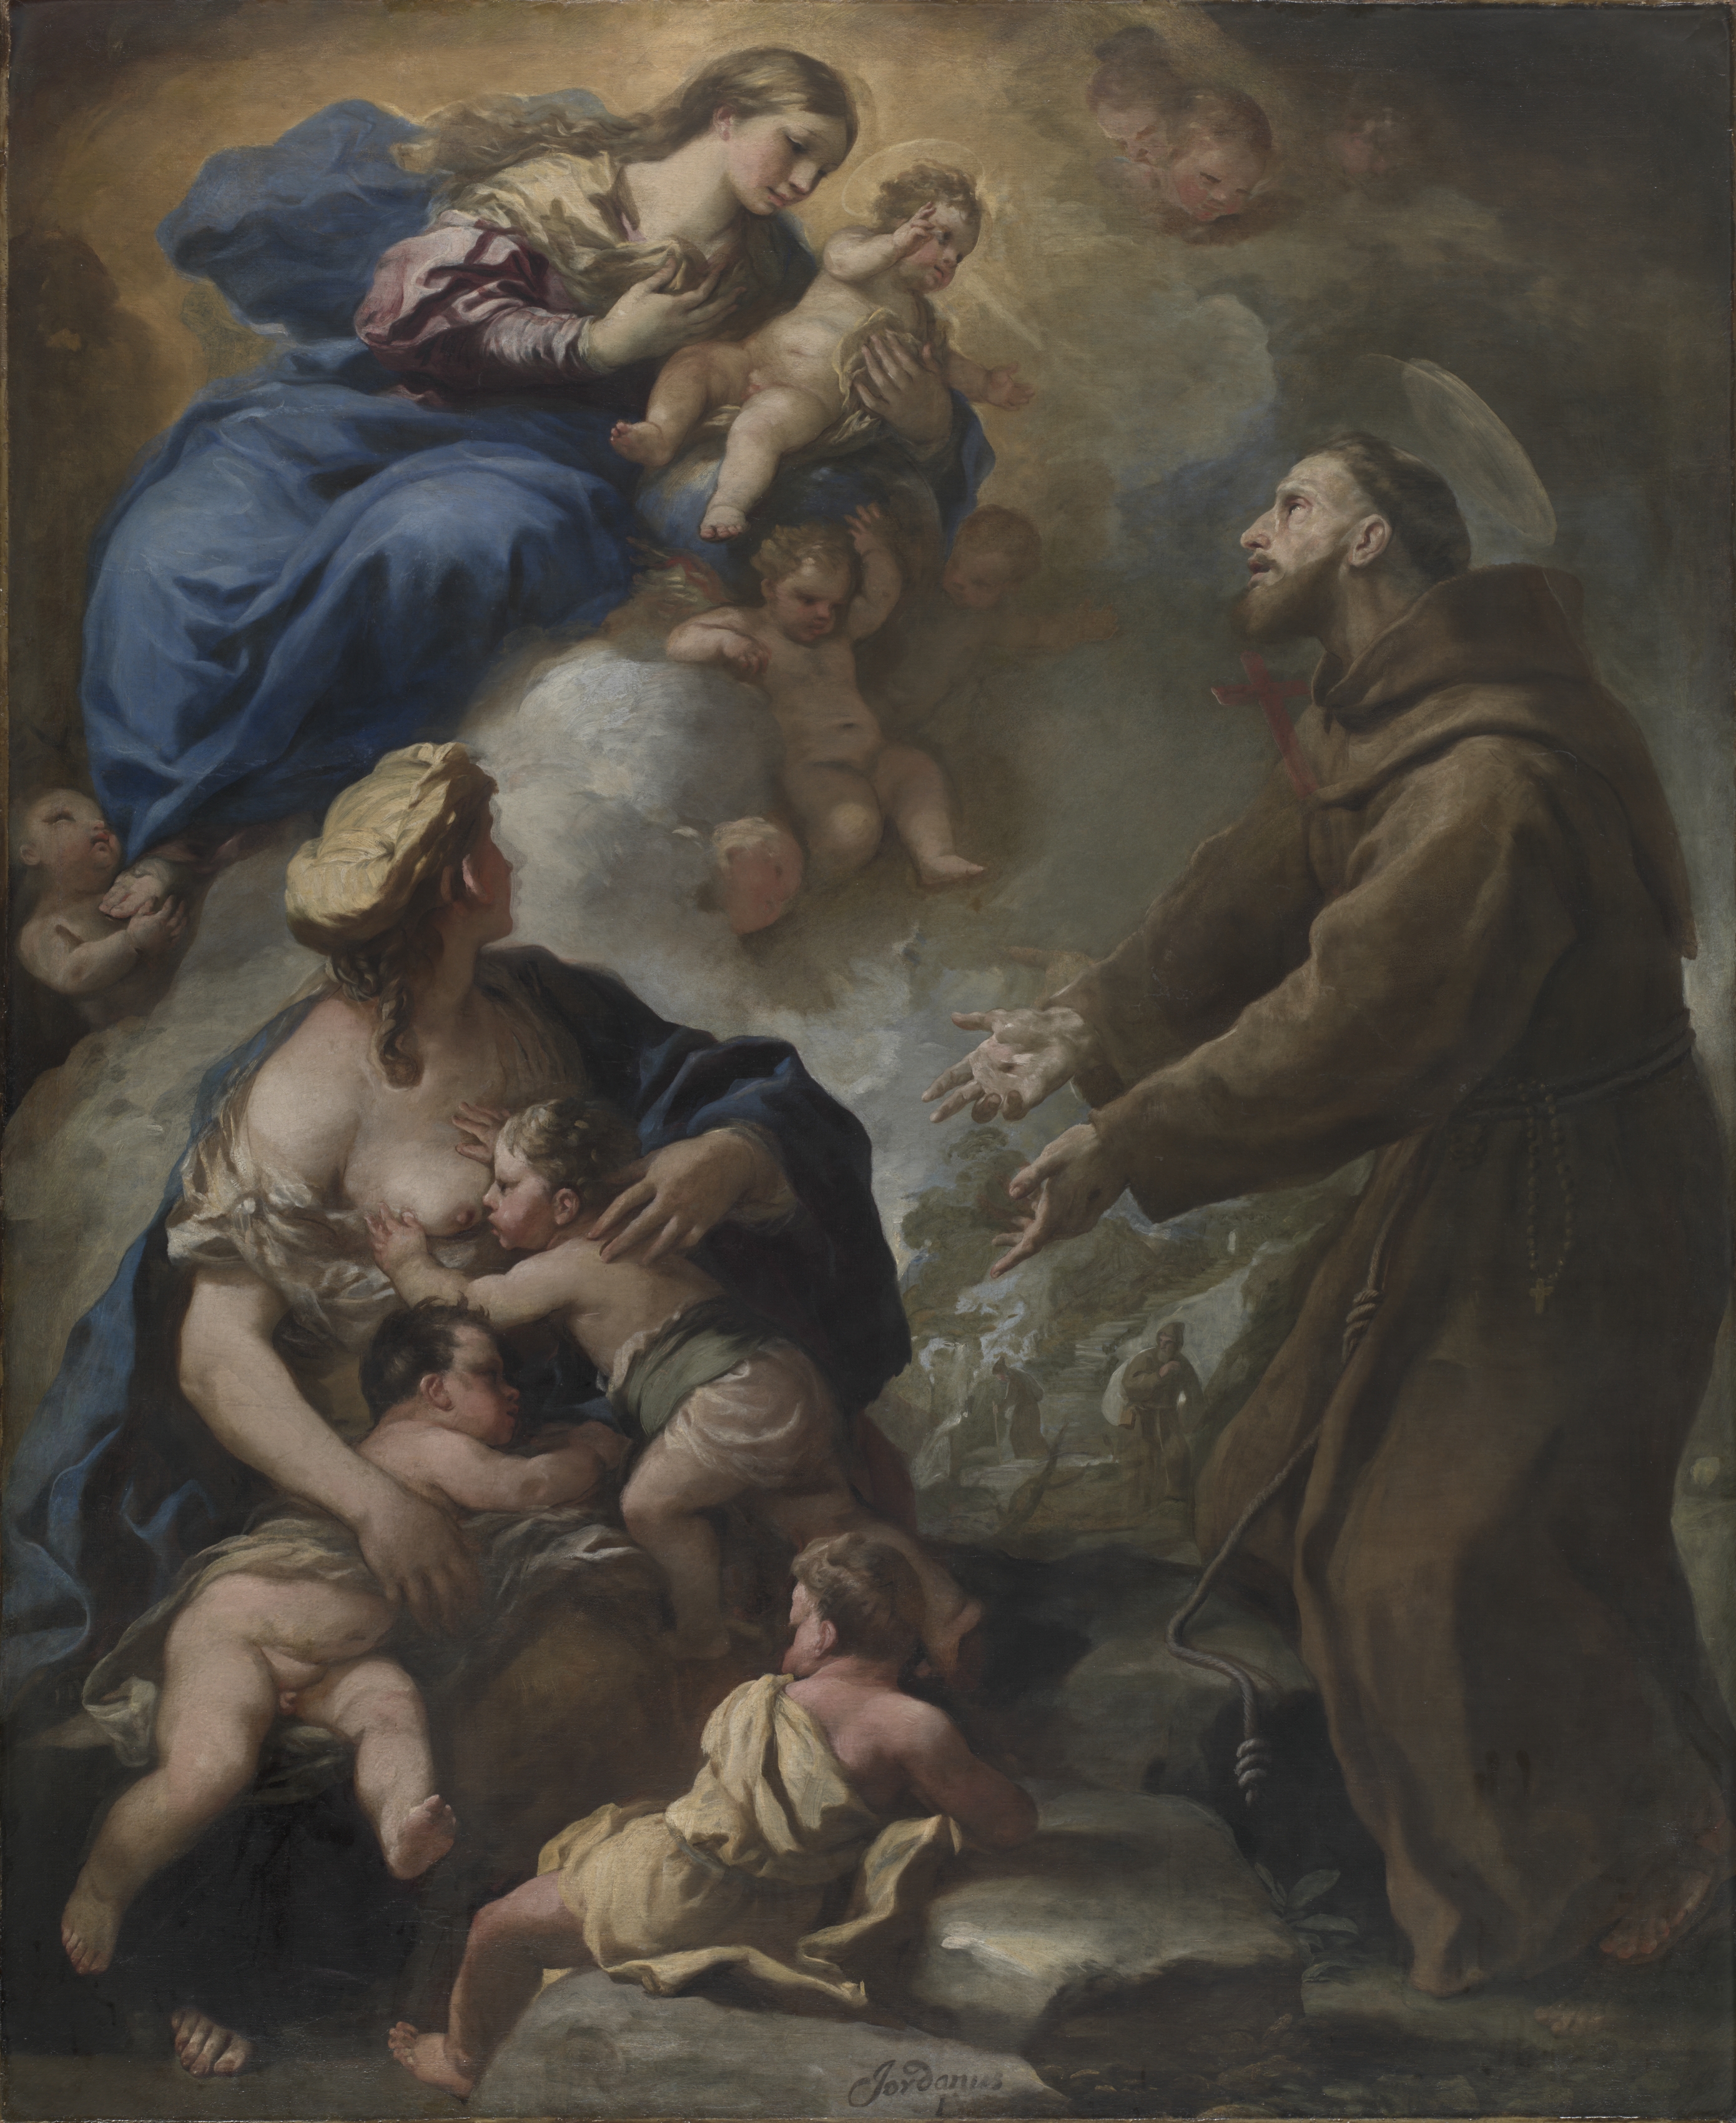 The Virgin and Child Appearing to Saint Francis of Assisi